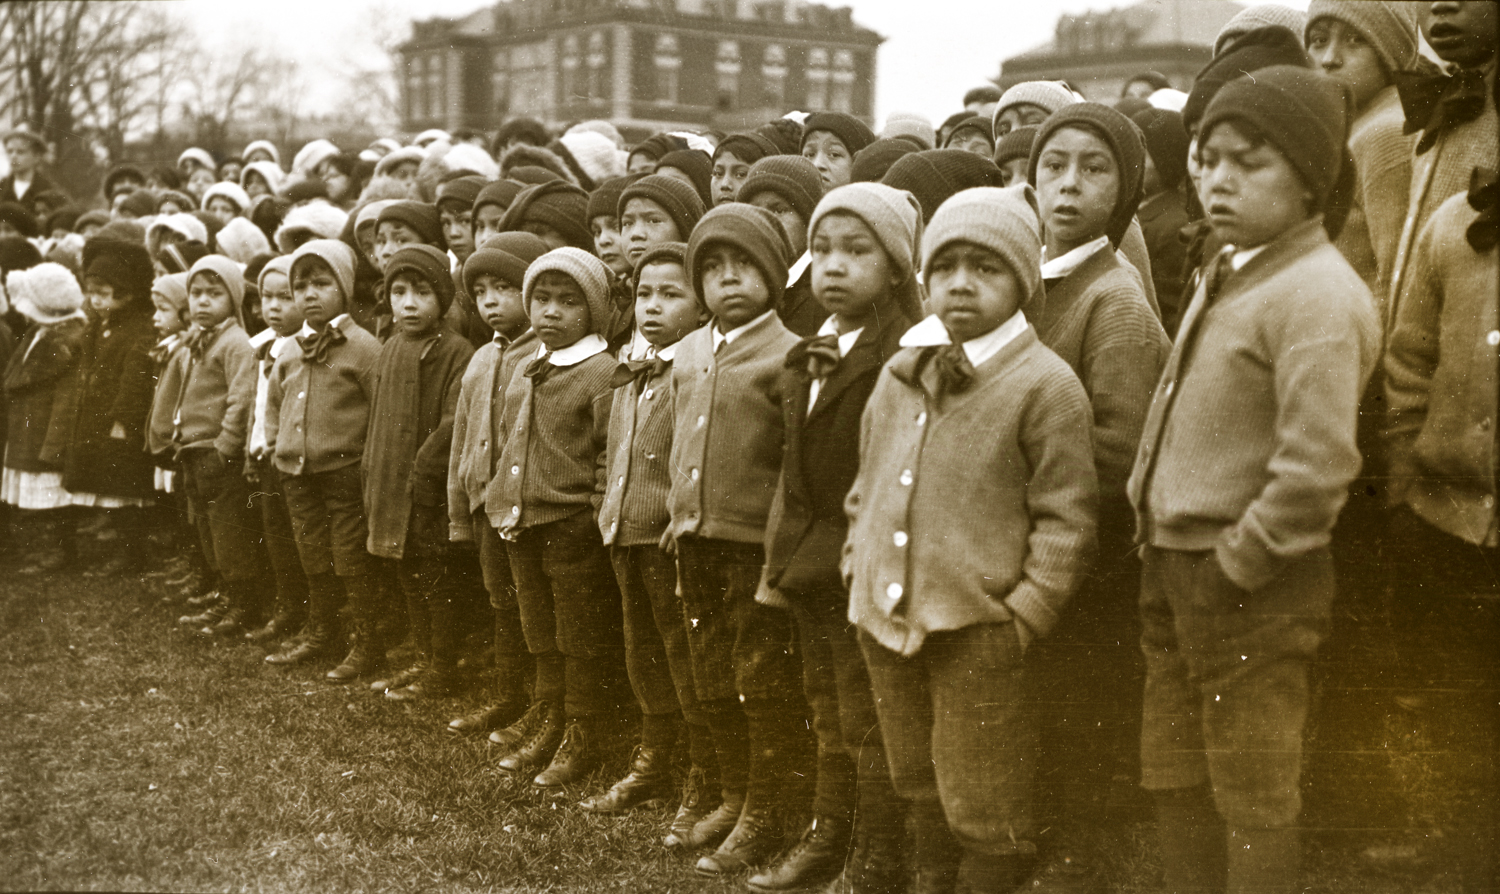 Thomas Indian School Children at Flag Raising Ceremony, November 28, 1913. Photograph by Joseph Dixon. Courtesy of the Mathers Museum of World Cultures, Wanamaker Collection, Indiana University, Bloomington, I.N., W-4312.